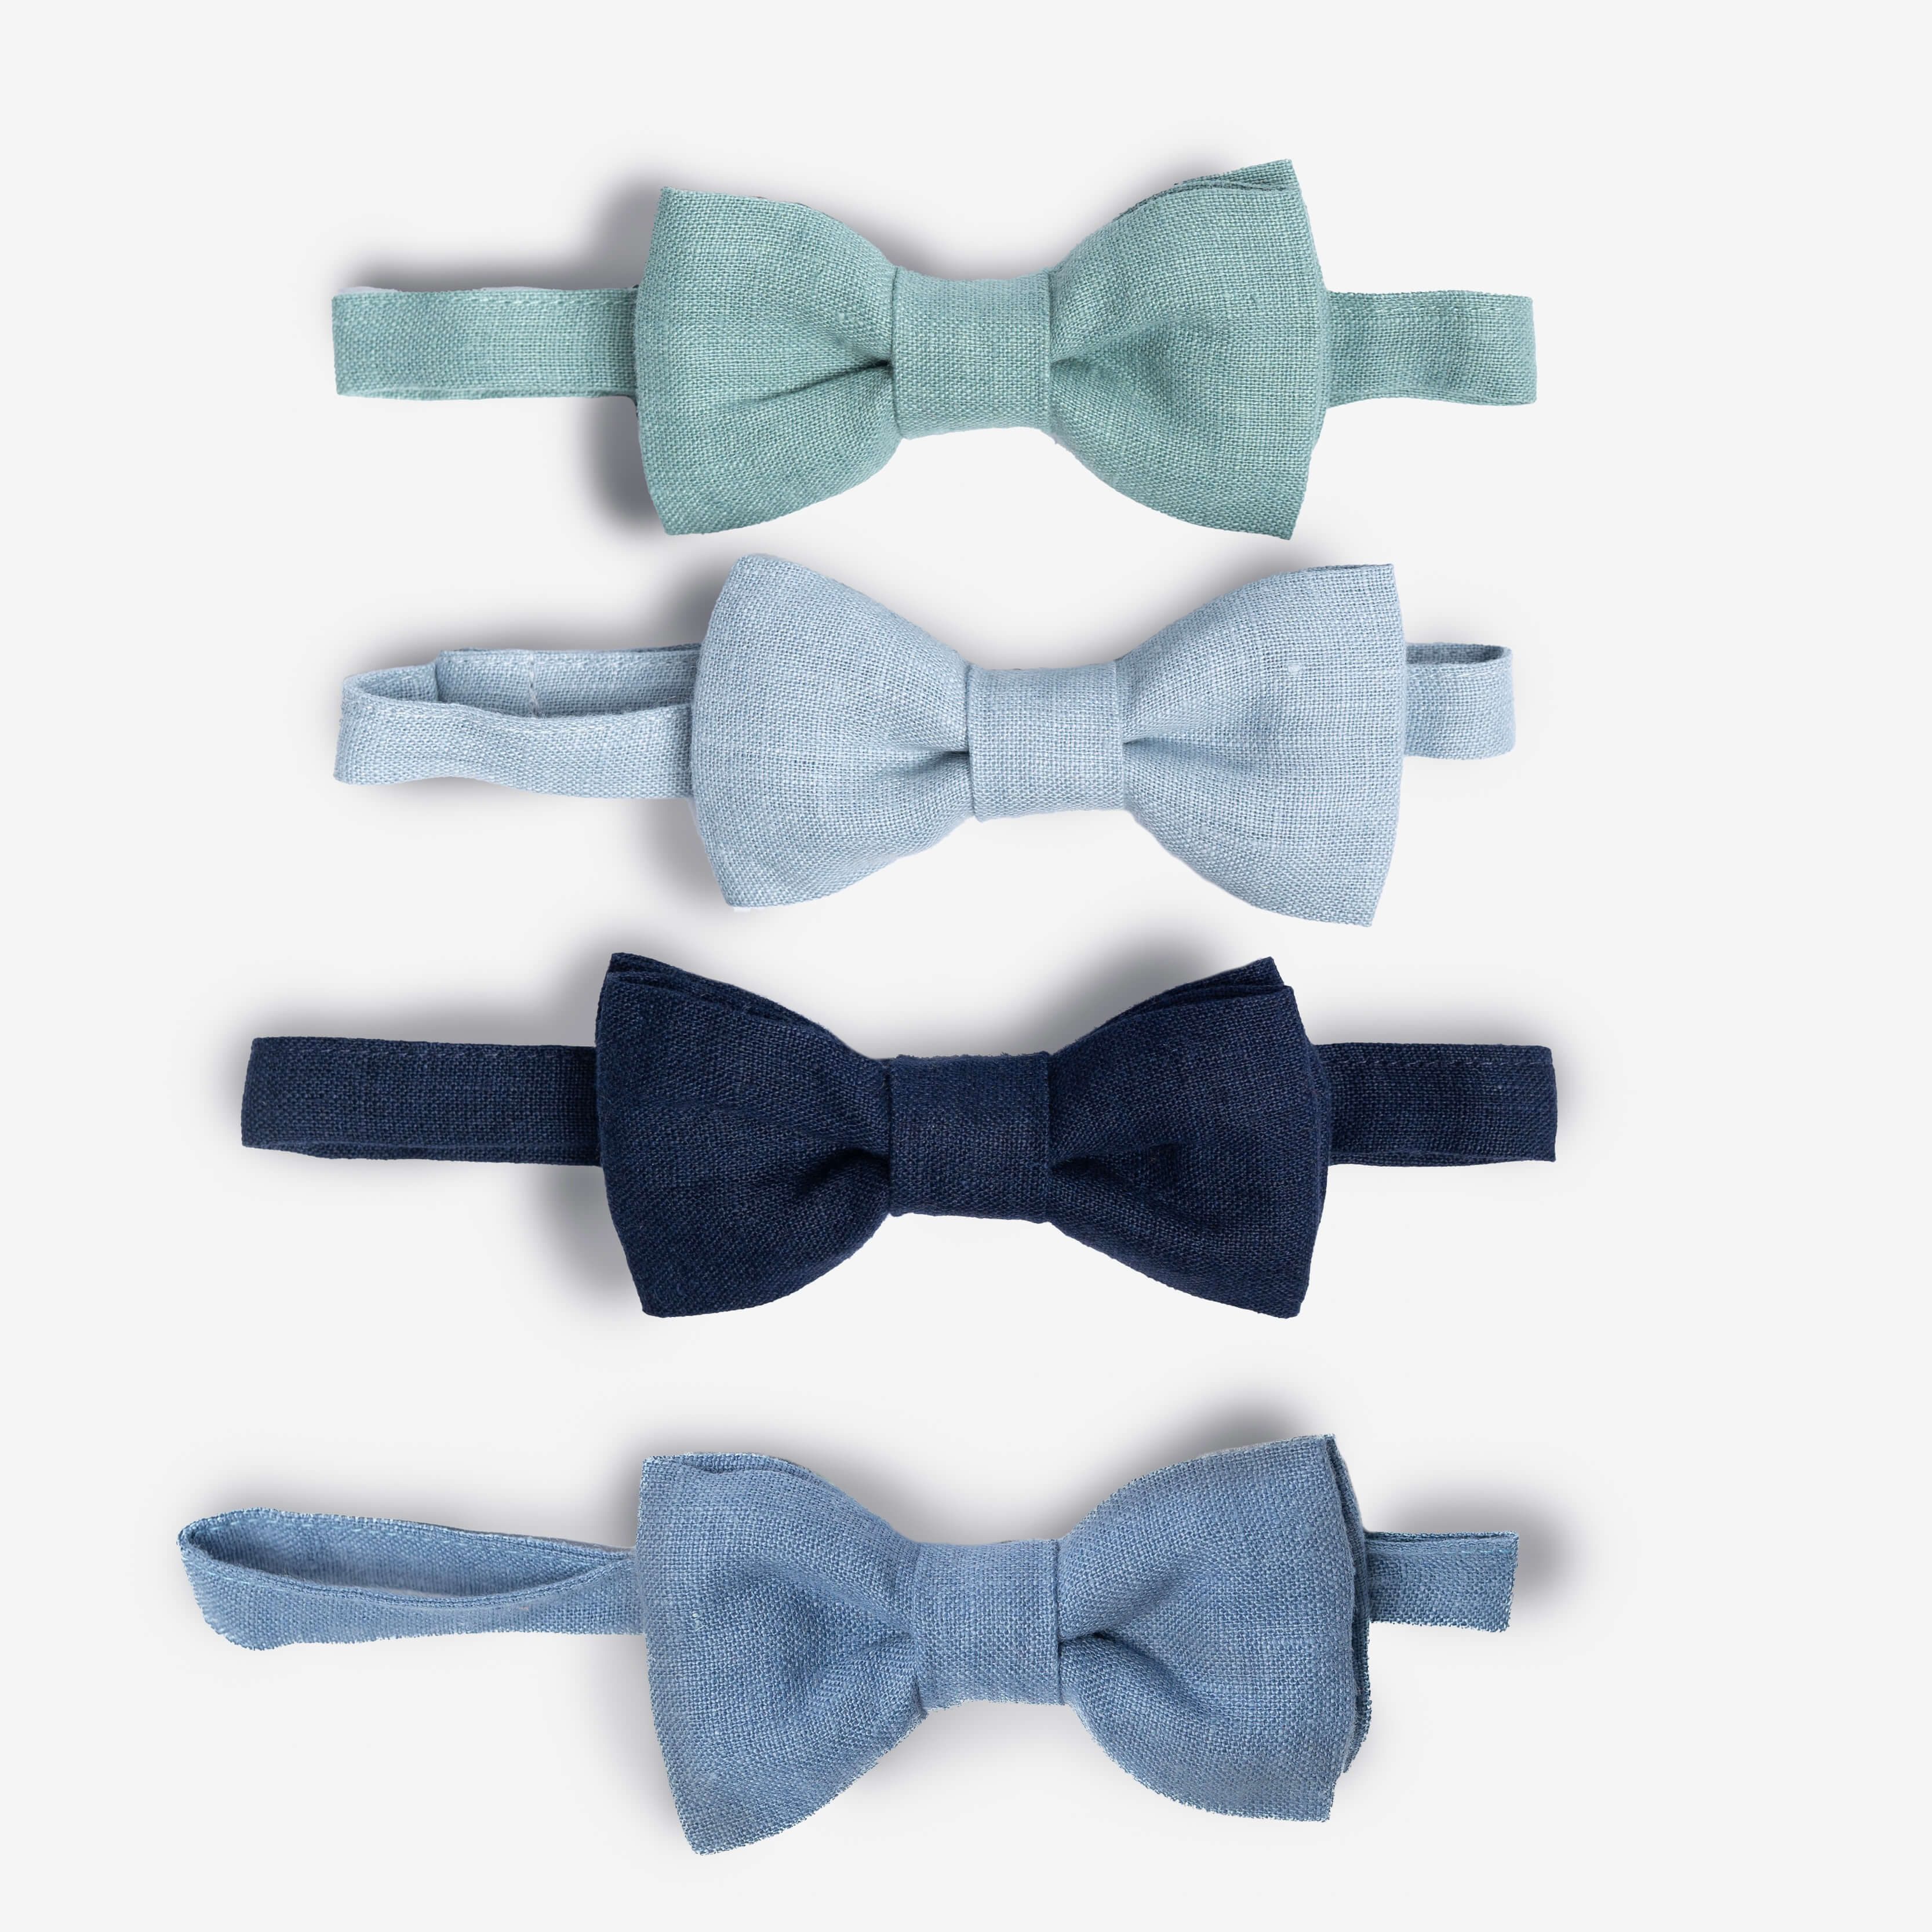 Collection of blue linen bow ties in turquoise, glacier, navy and dusty blue